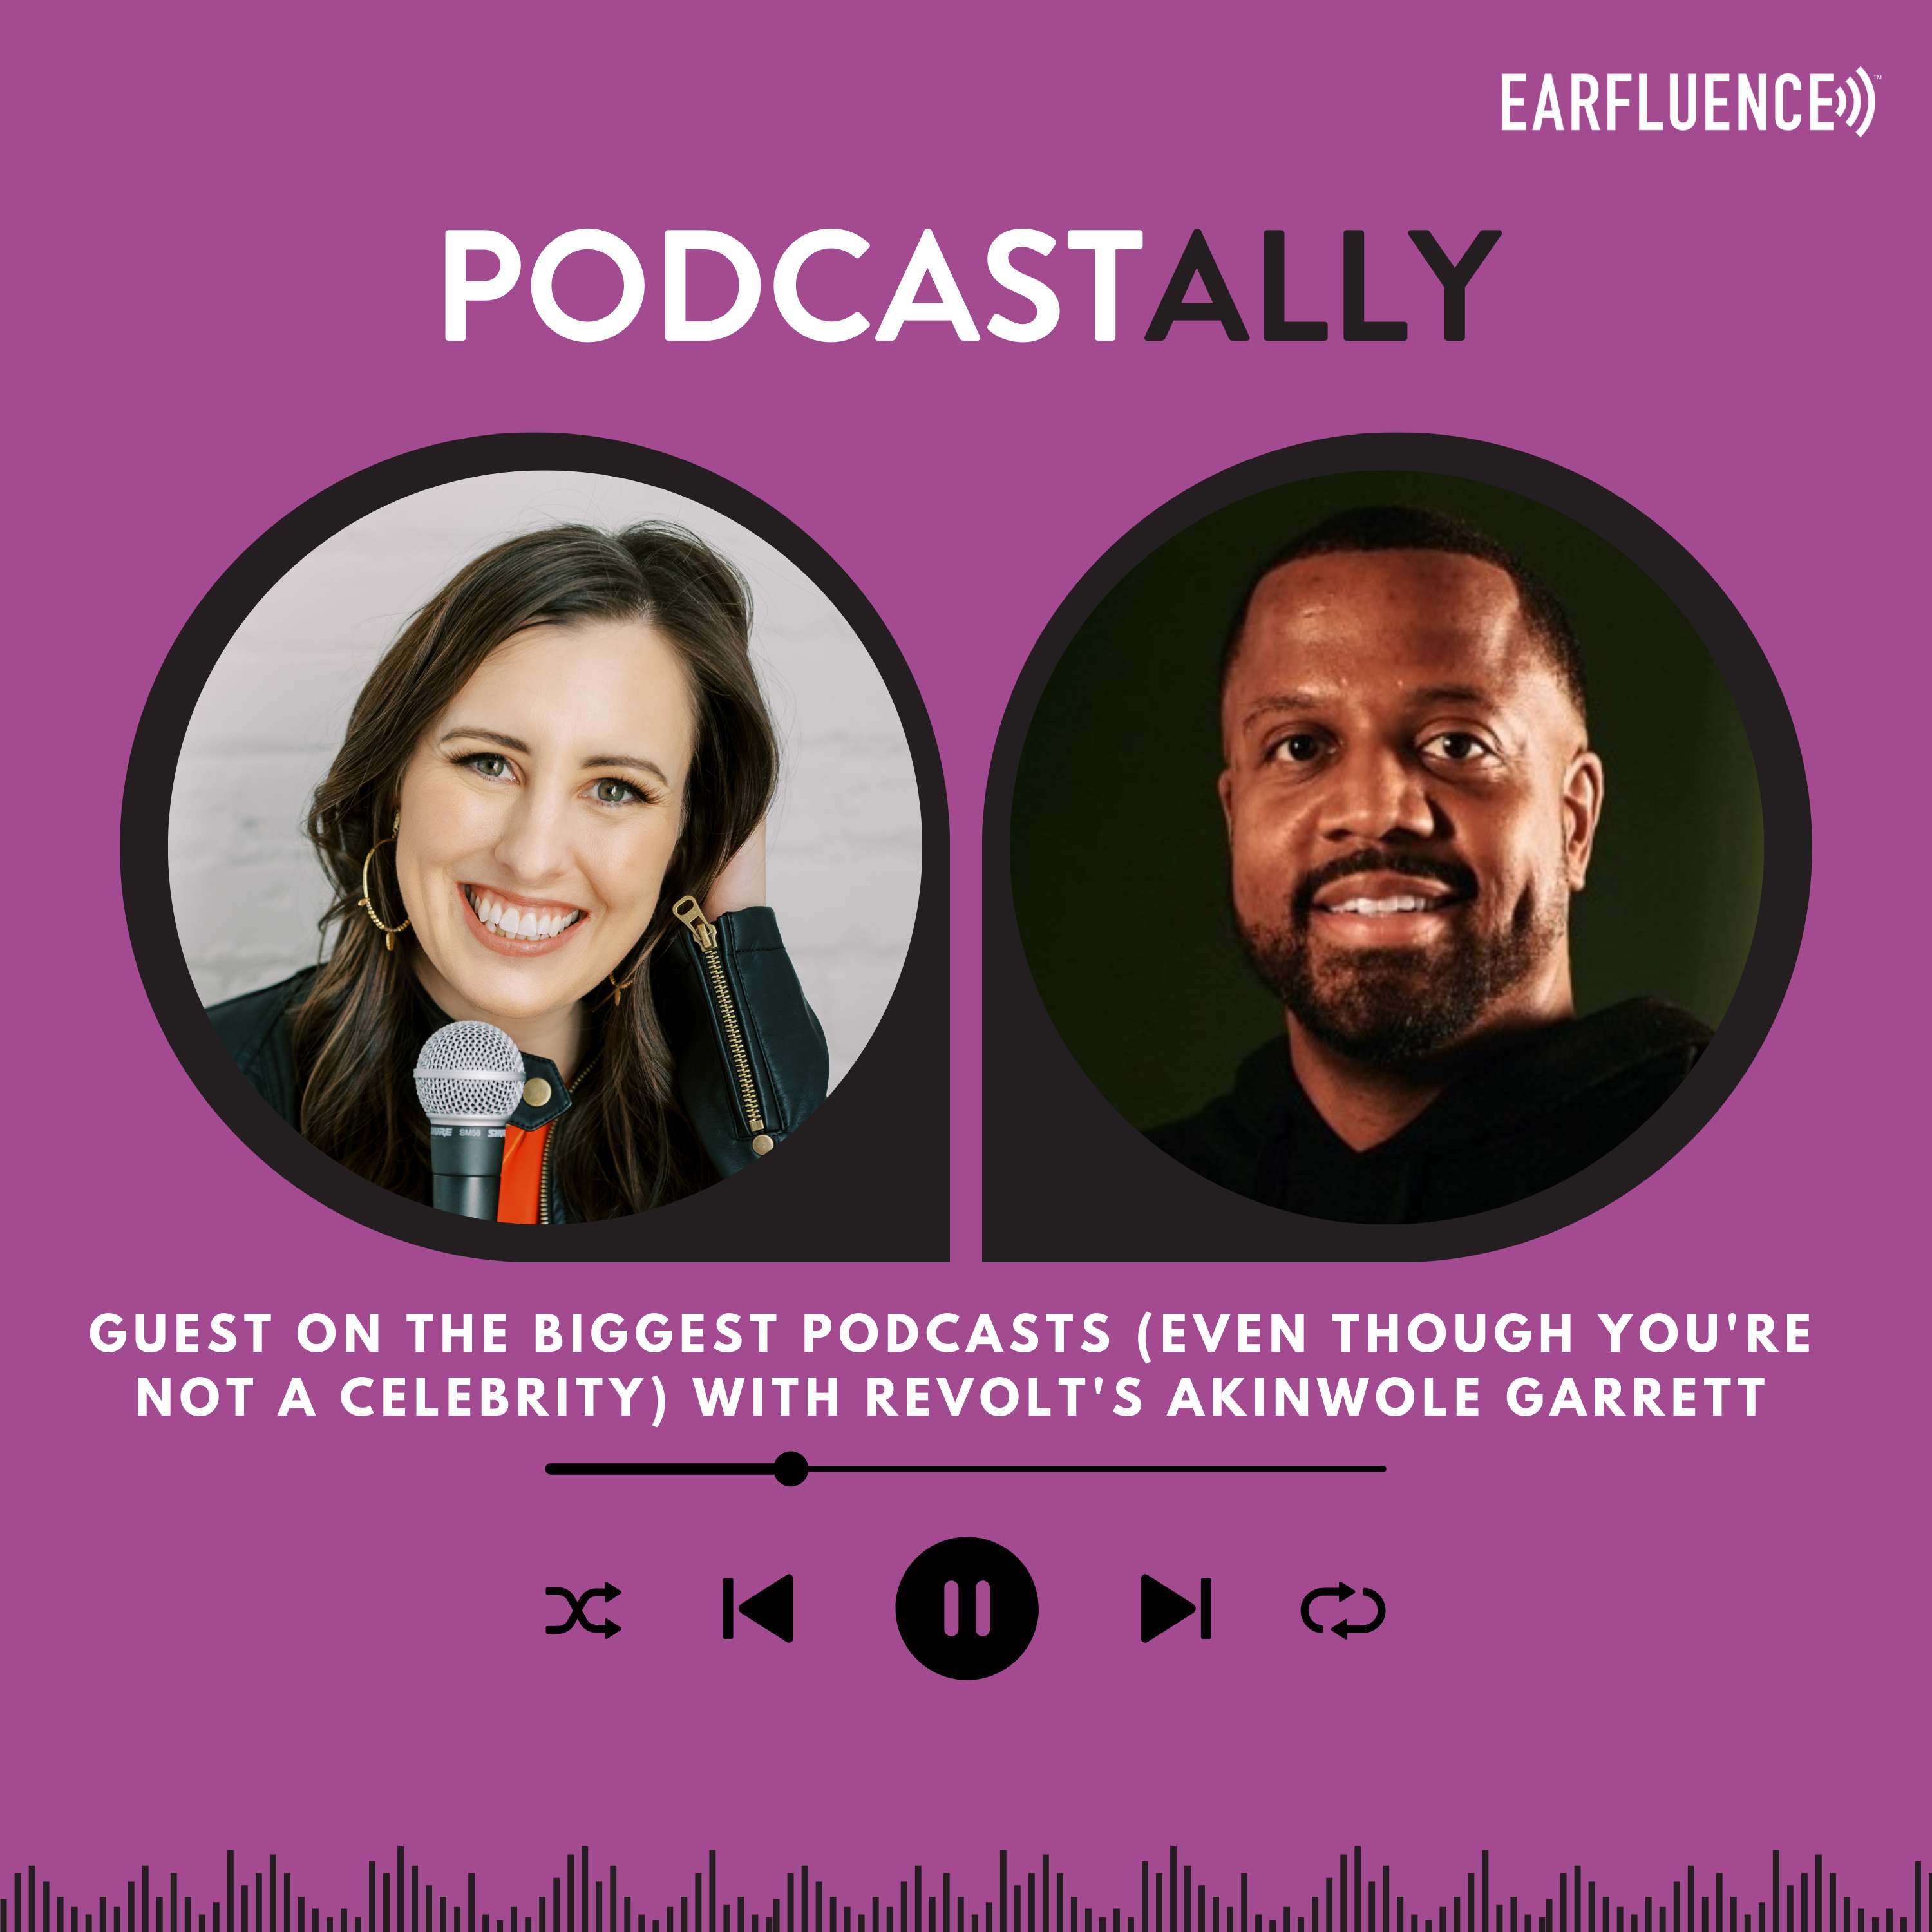 Guest on the Biggest Podcasts (Even Though You’re Not a Celebrity) with REVOLT’s Akinwole Garrett